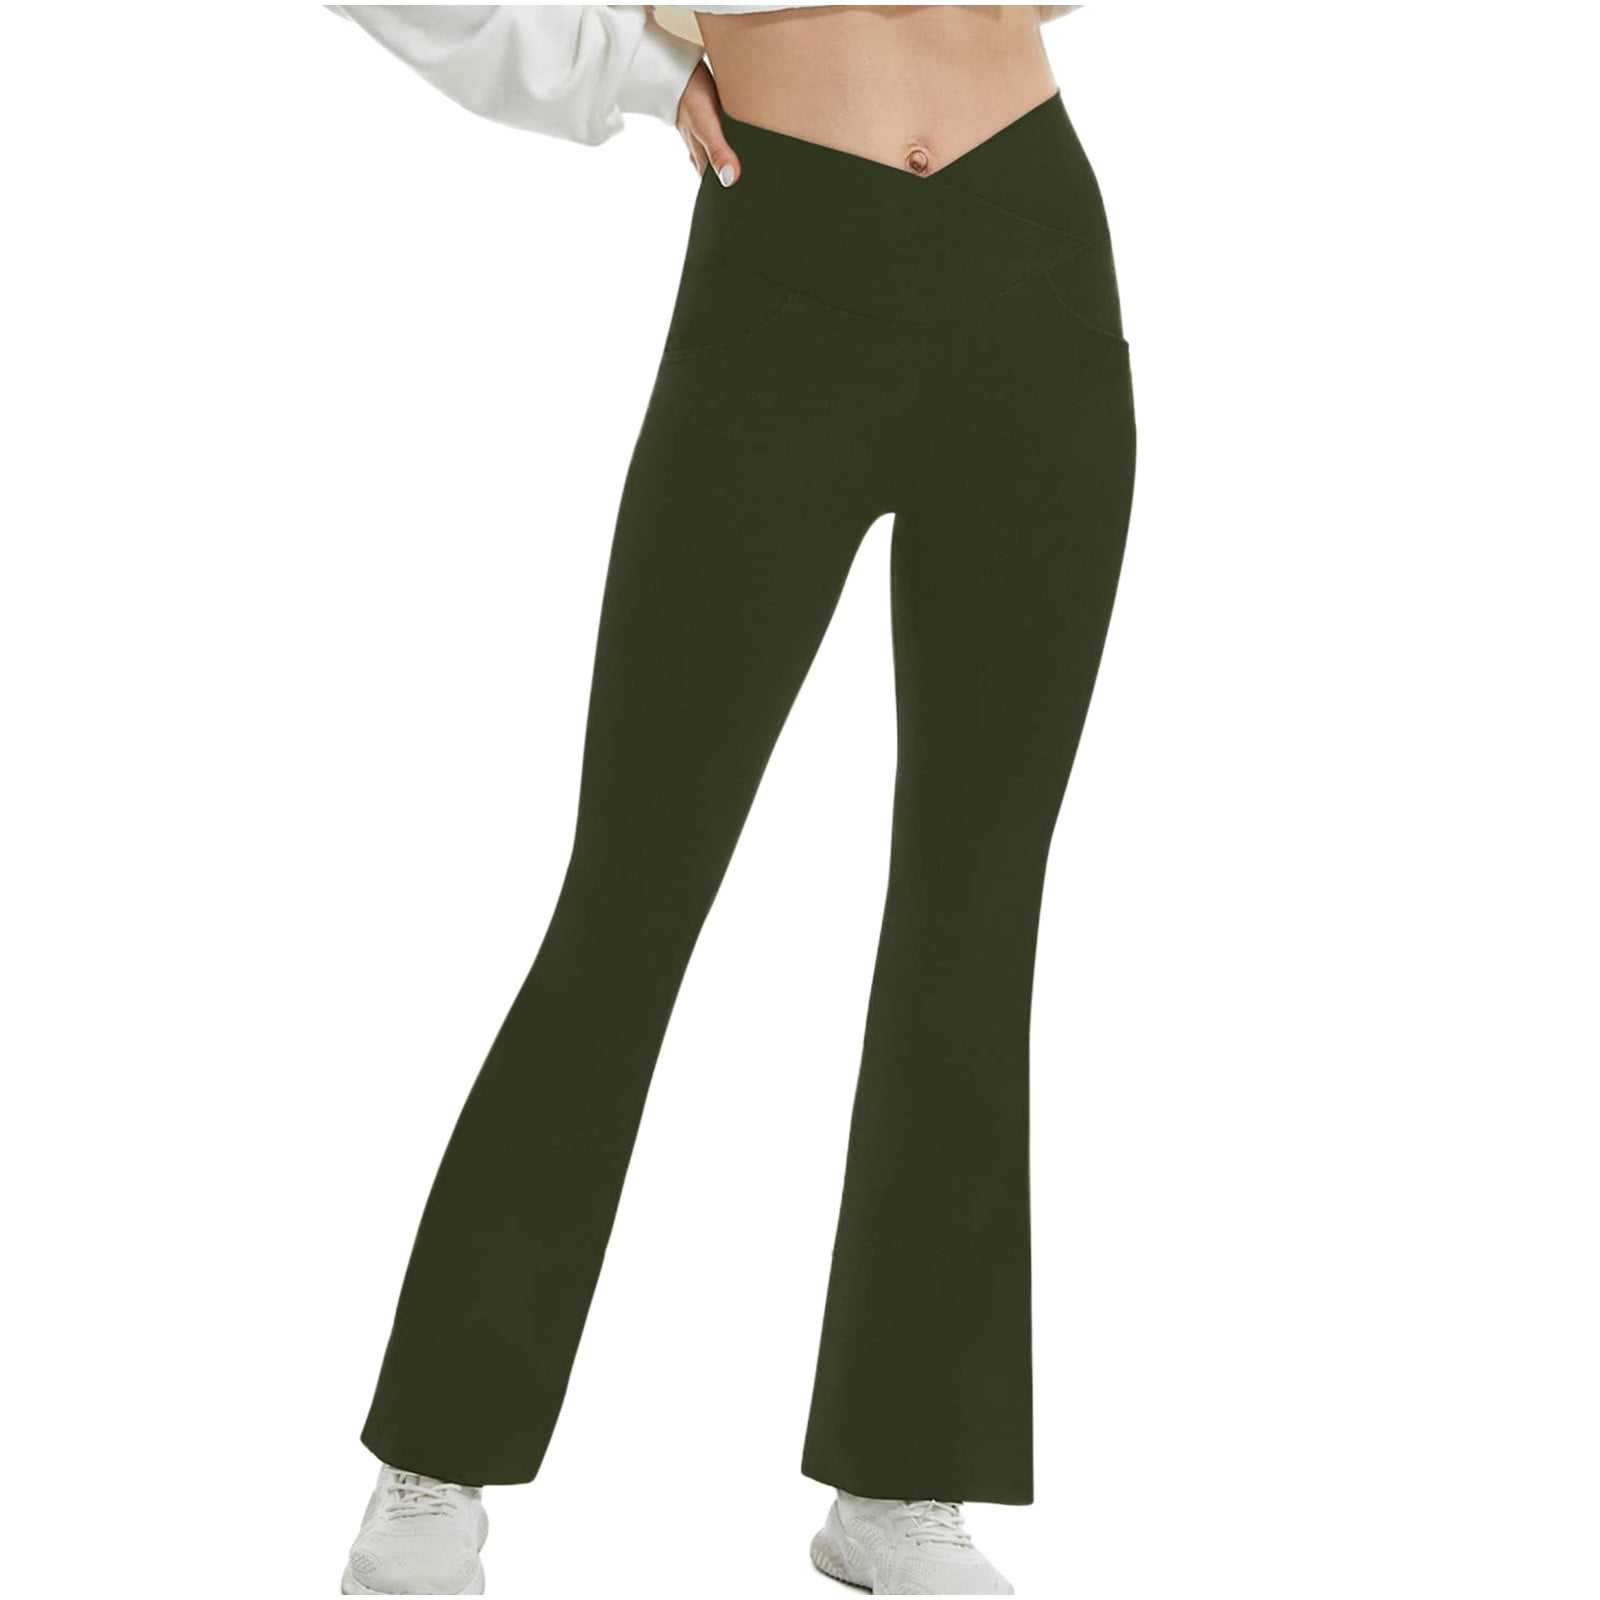 TOWED22 Yoga Pants for Women Women Yoga Pants High Waist Flare Leggings  Wide Straight Leg Sports Trousers Flared Trousers with Pocket(Green,M) 